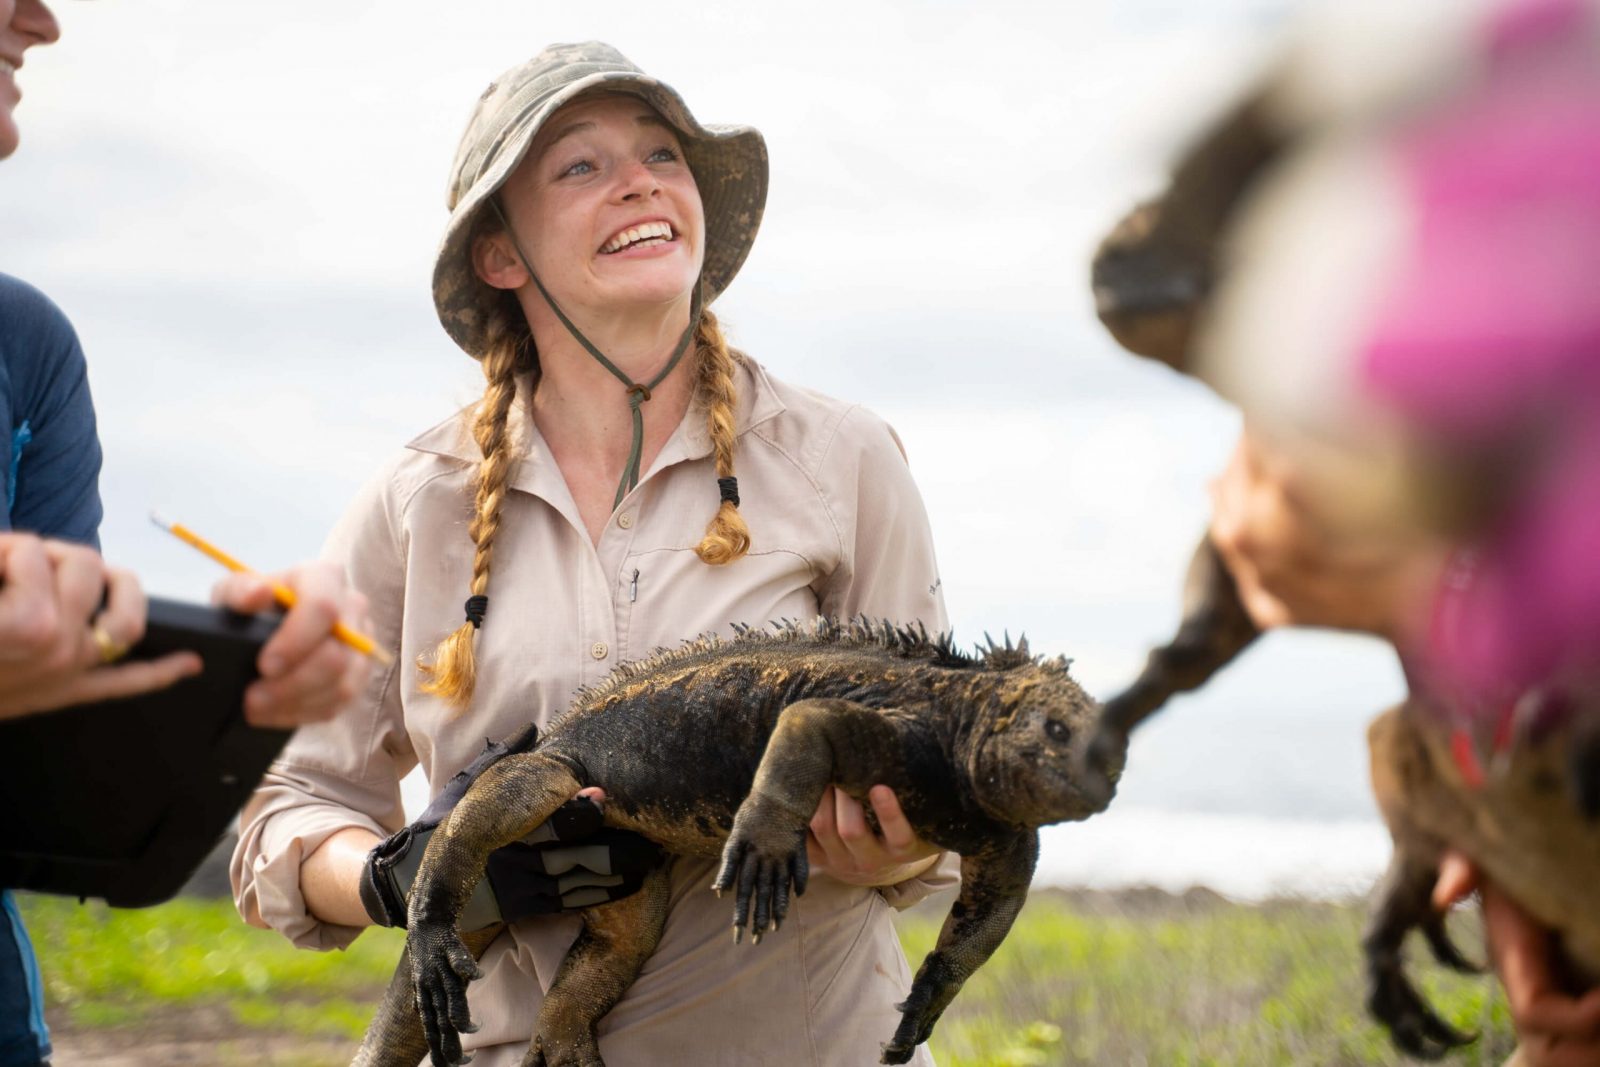 A female researcher wearing a camouflaged-patterned hat smiles at her colleagues as she holds a marine iguana.